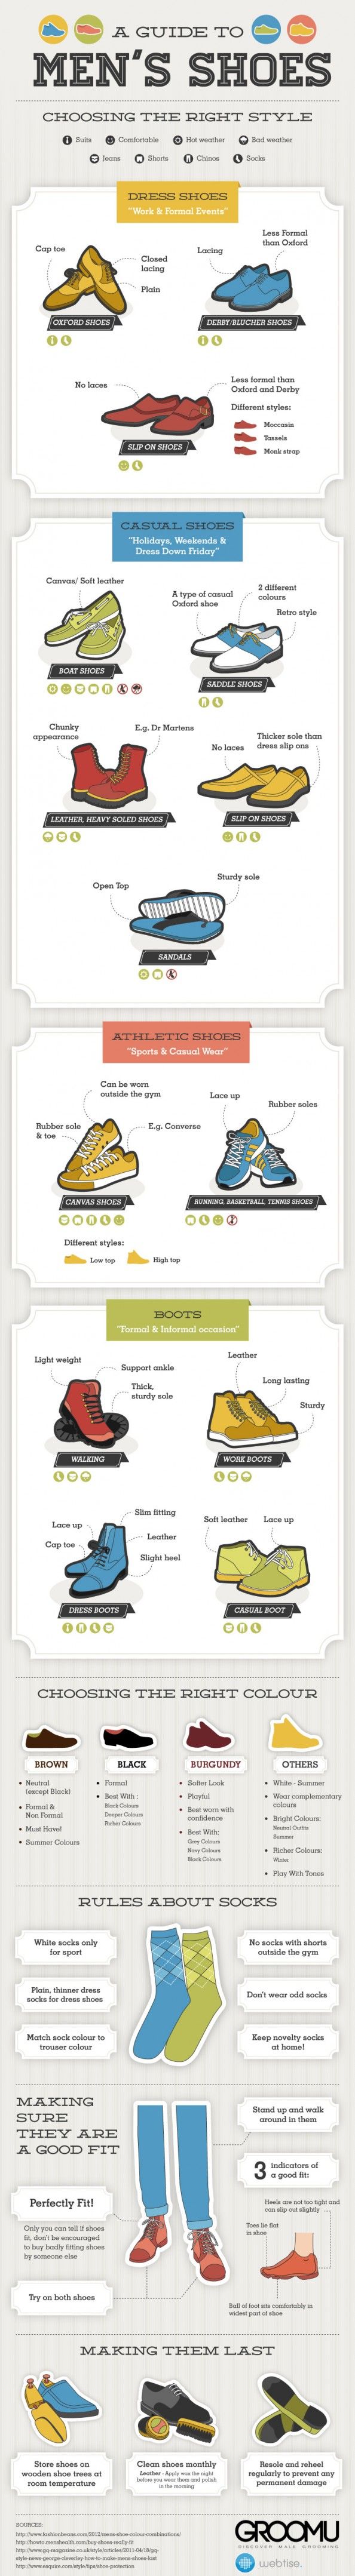 Amazing Guide to Men's Shoes